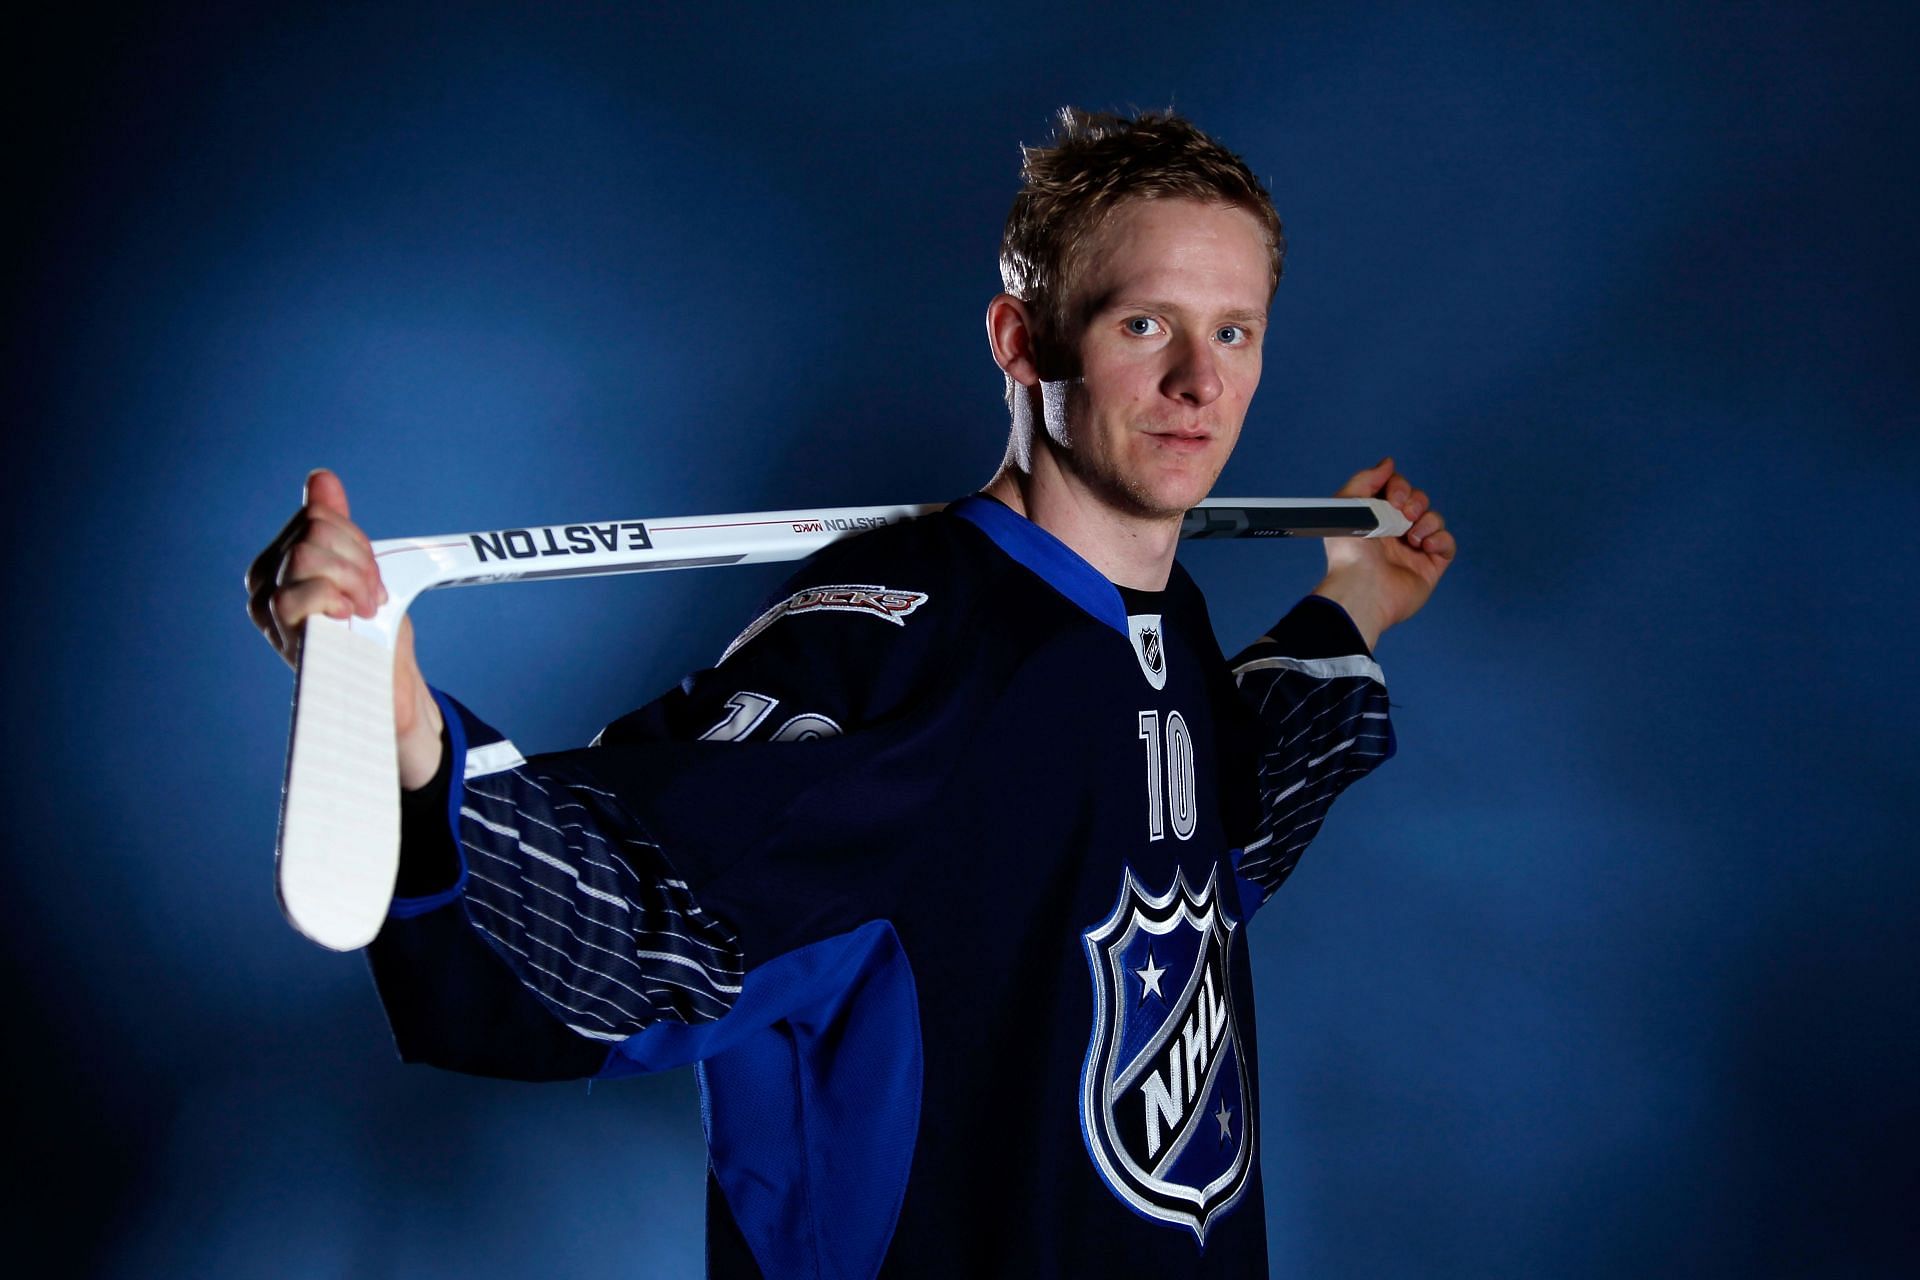 2012 NHL All-Star Game - Player Portraits